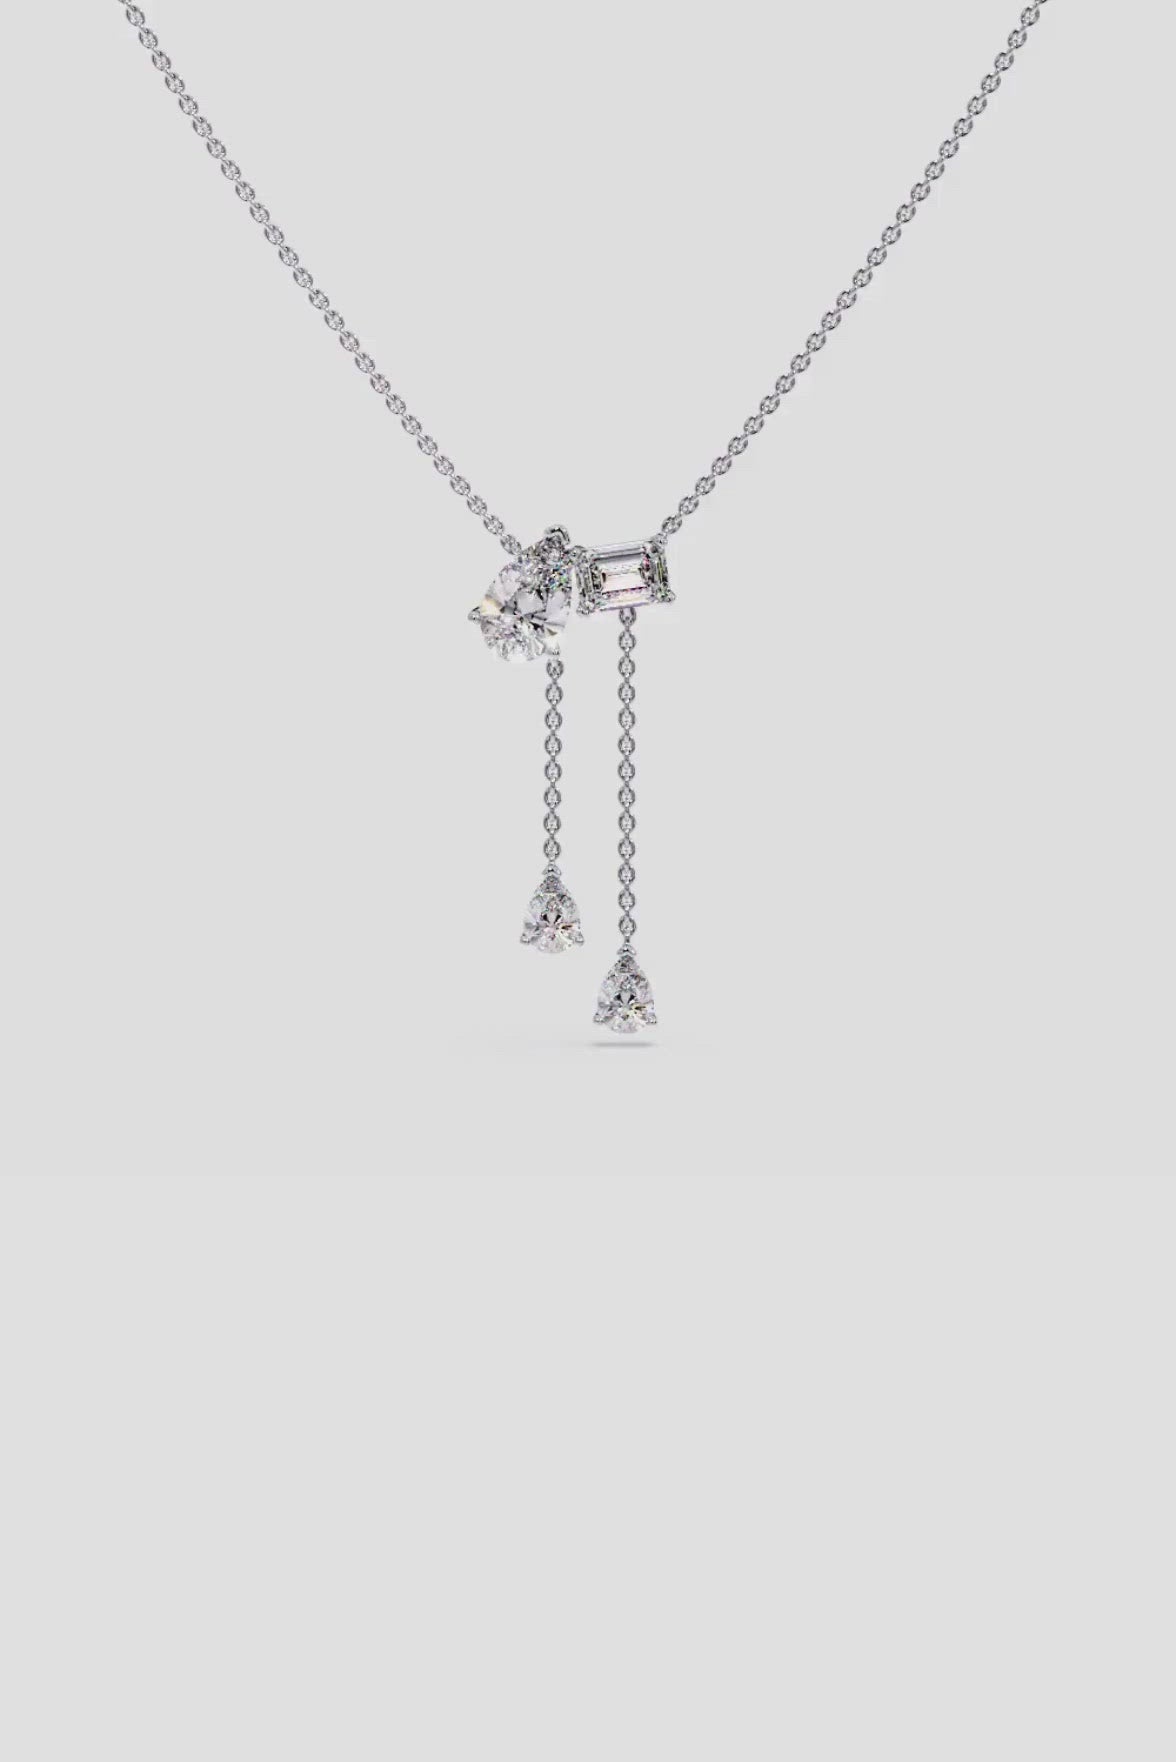 Askew 2 Stone Solitaire Necklace With Drops Compelte Look Video House of Quadri